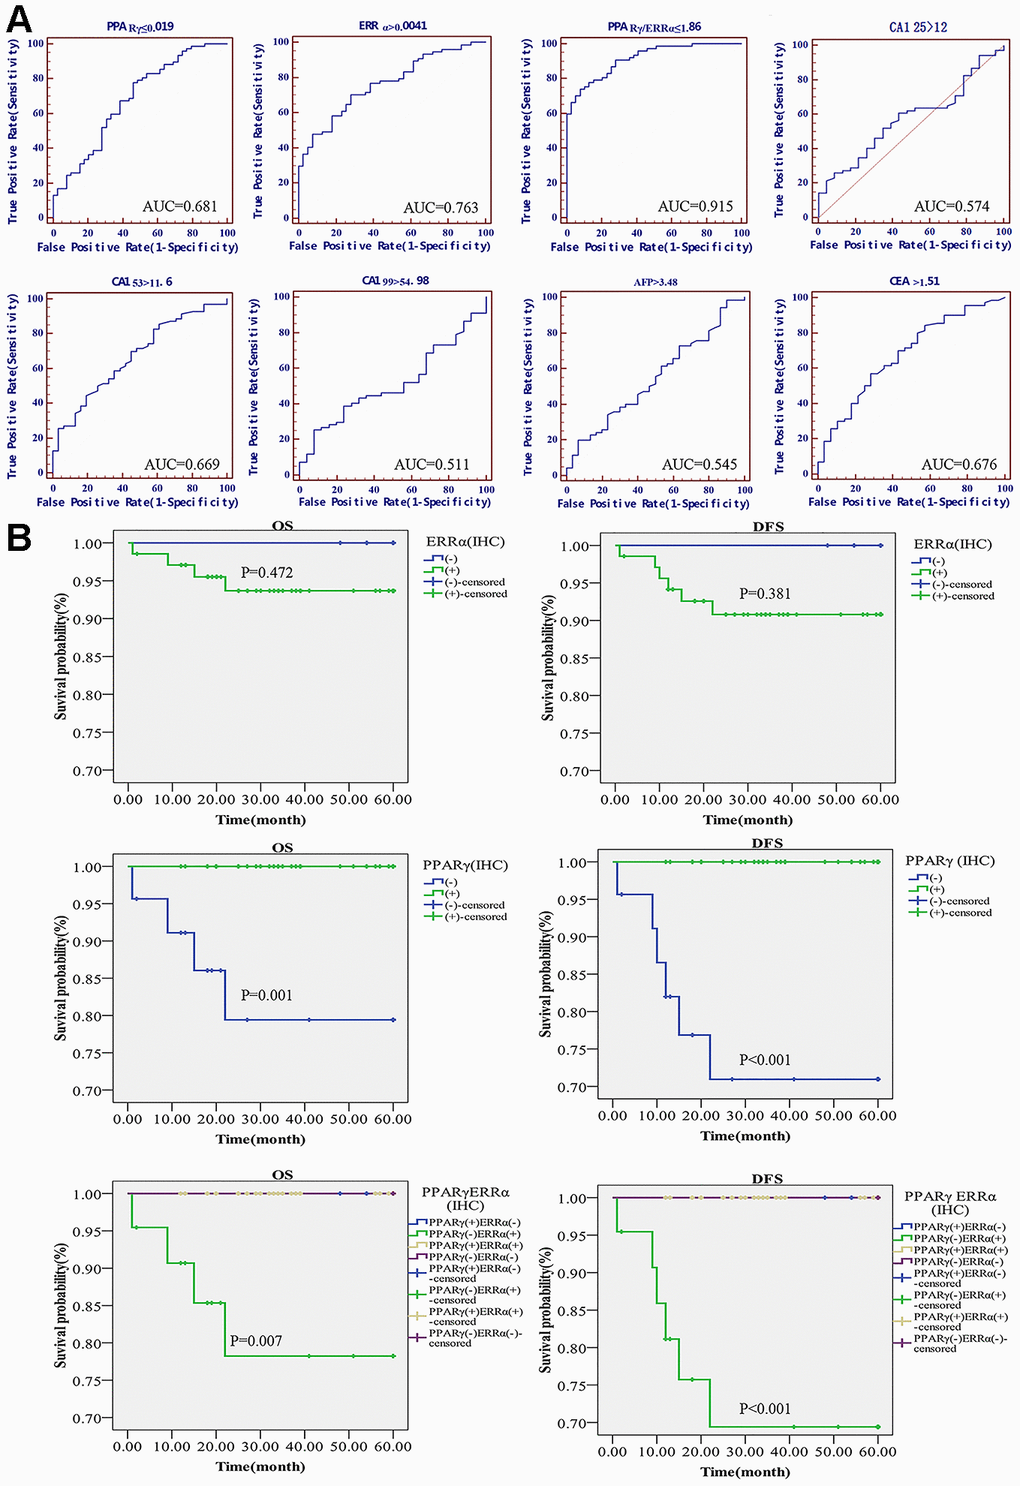 Diagnostic and prognostic value of the PPARγ/ERRα ratio for EC. (A) ROC curves of the mRNA expression of PPARγ, the mRNA expression of ERRα, the PPARγ/ERRα ratio, CA125, CA199, CA153, CEA, and AFP. (B) DFS and OS in EC patients with different expression patterns of PPARγ/ERRα. Patients with PPARγ(+)/ERRα(-) had longer DFS and OS. The mRNA expression of PPARγ and ERRα was quantified using the 2-ΔCT method. PPARγ/ERRα was quantified as the ratio of the mRNA expression of PPARγ to the mRNA expression of ERRα. ROC, receiver operating characteristic; DFS, disease-free survival. OS, overall survival.